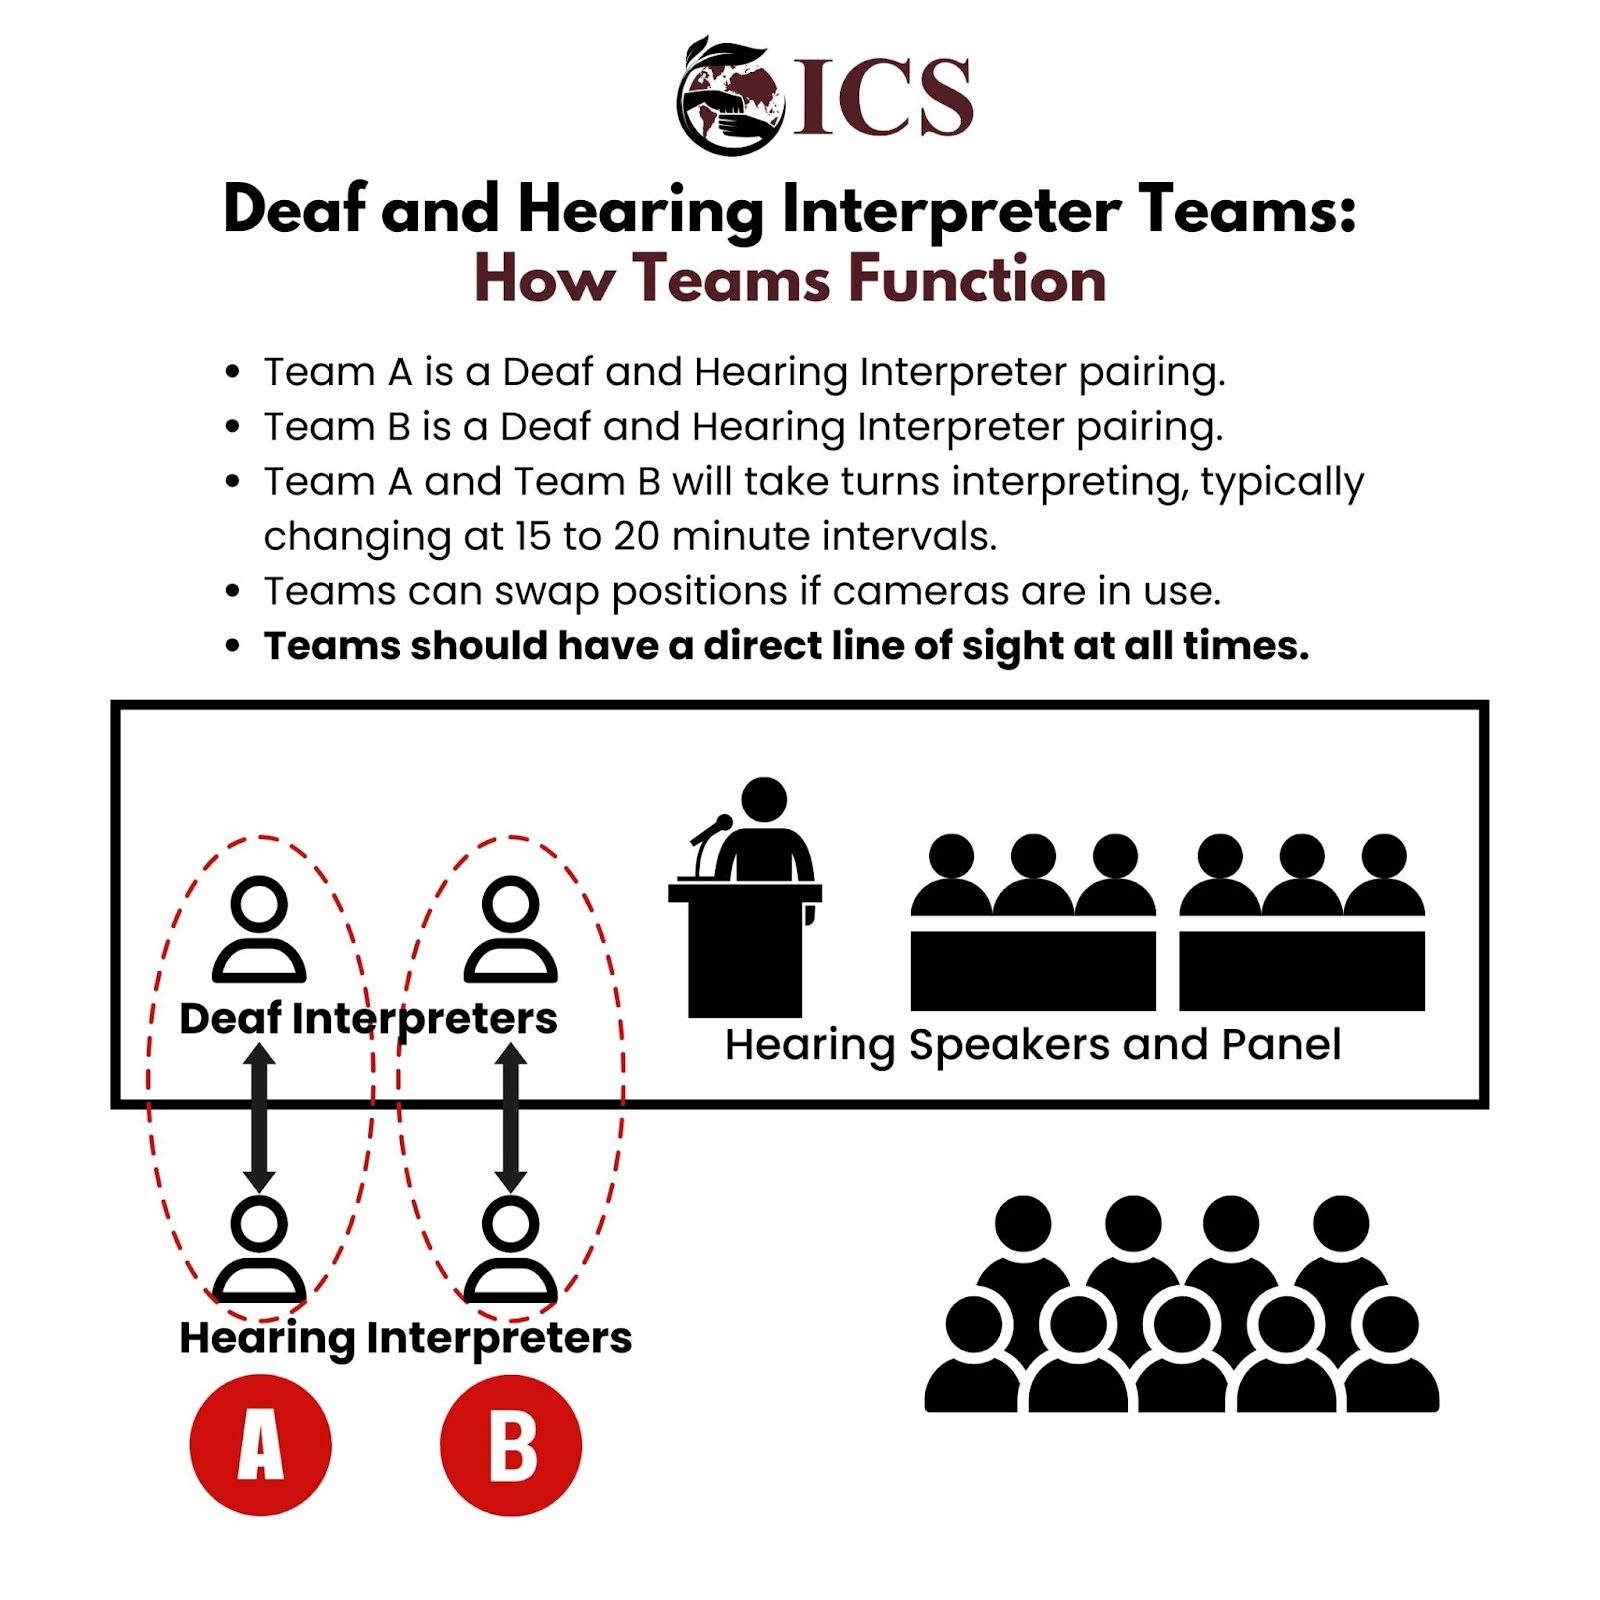 How Deaf and Hearing Interpreter teams function